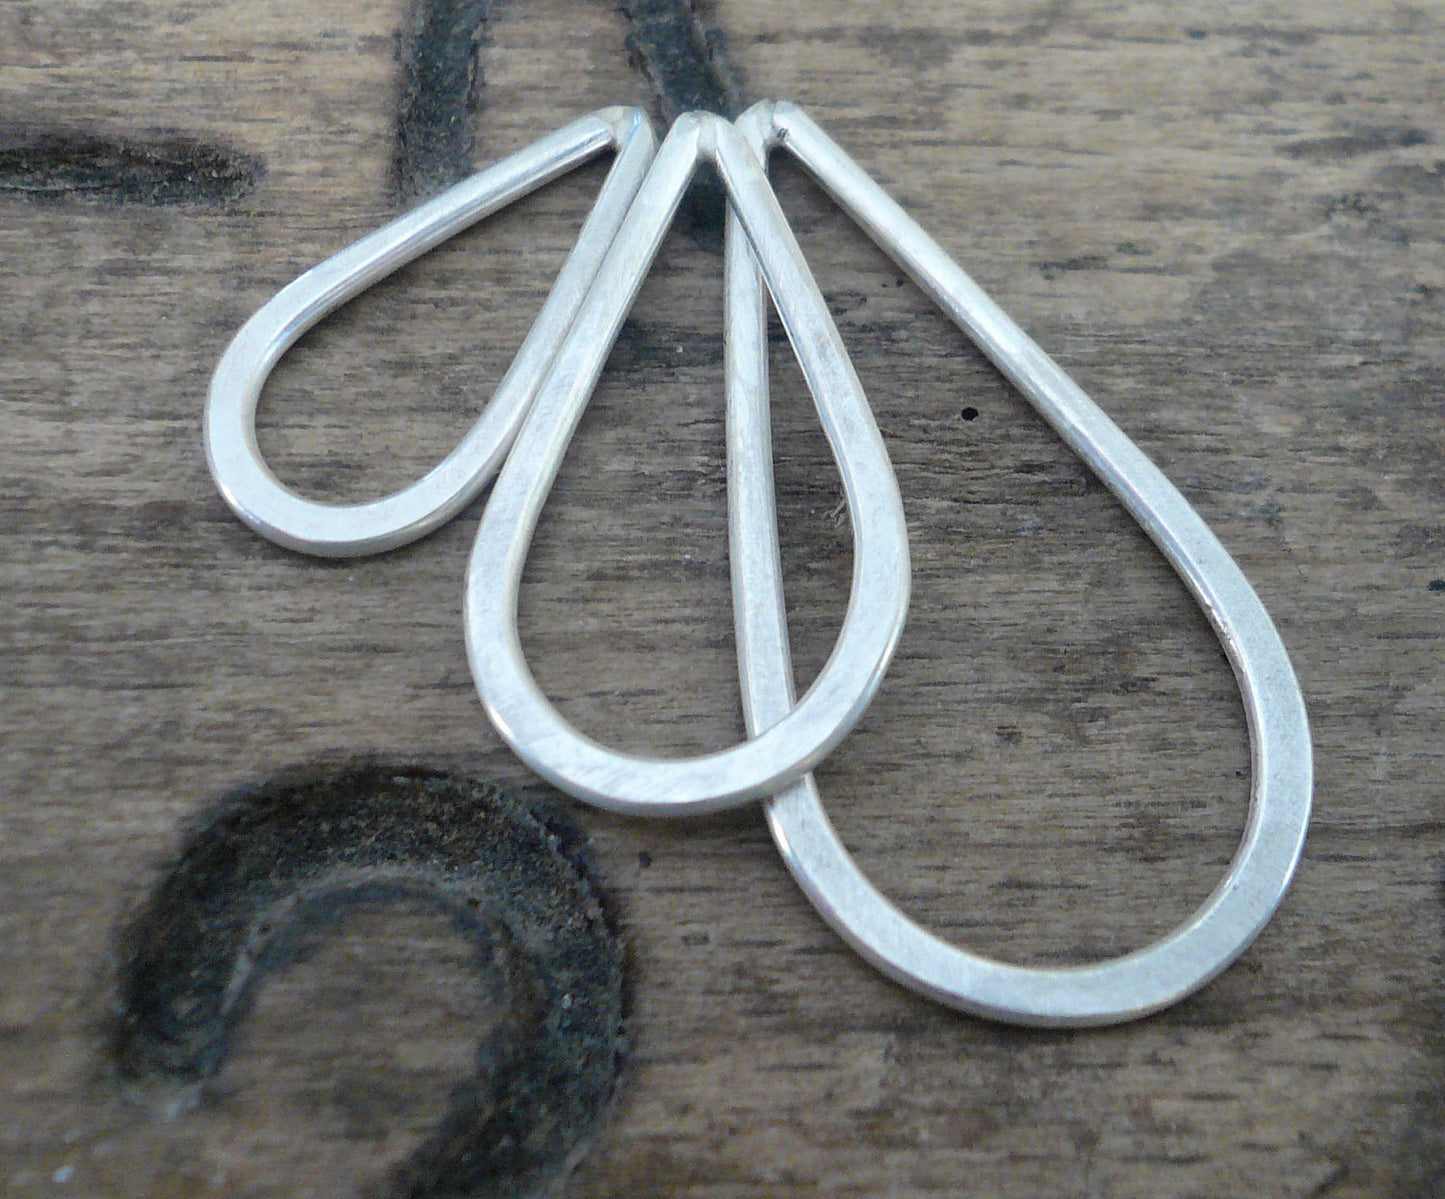 Medium Hammered Oxidized Sterling Silver Tear Drops - Handmade. Hand forged. 22mm. 1 pair